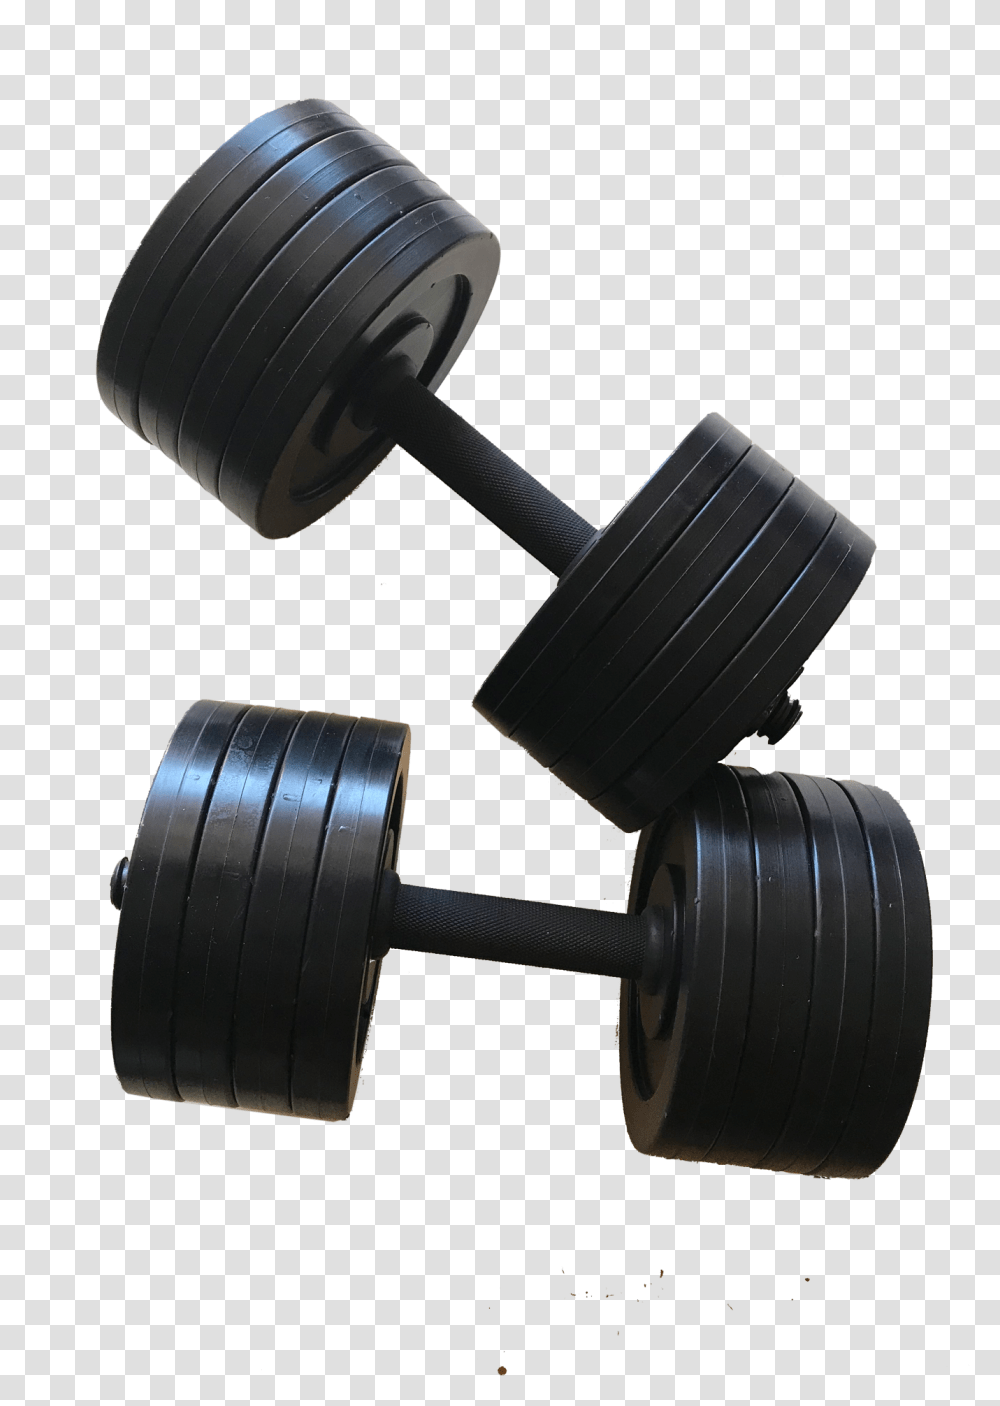 Fake Weights Buy Fake Weights Plastic Weights Prop, Hammer, Tool, Machine, Tire Transparent Png